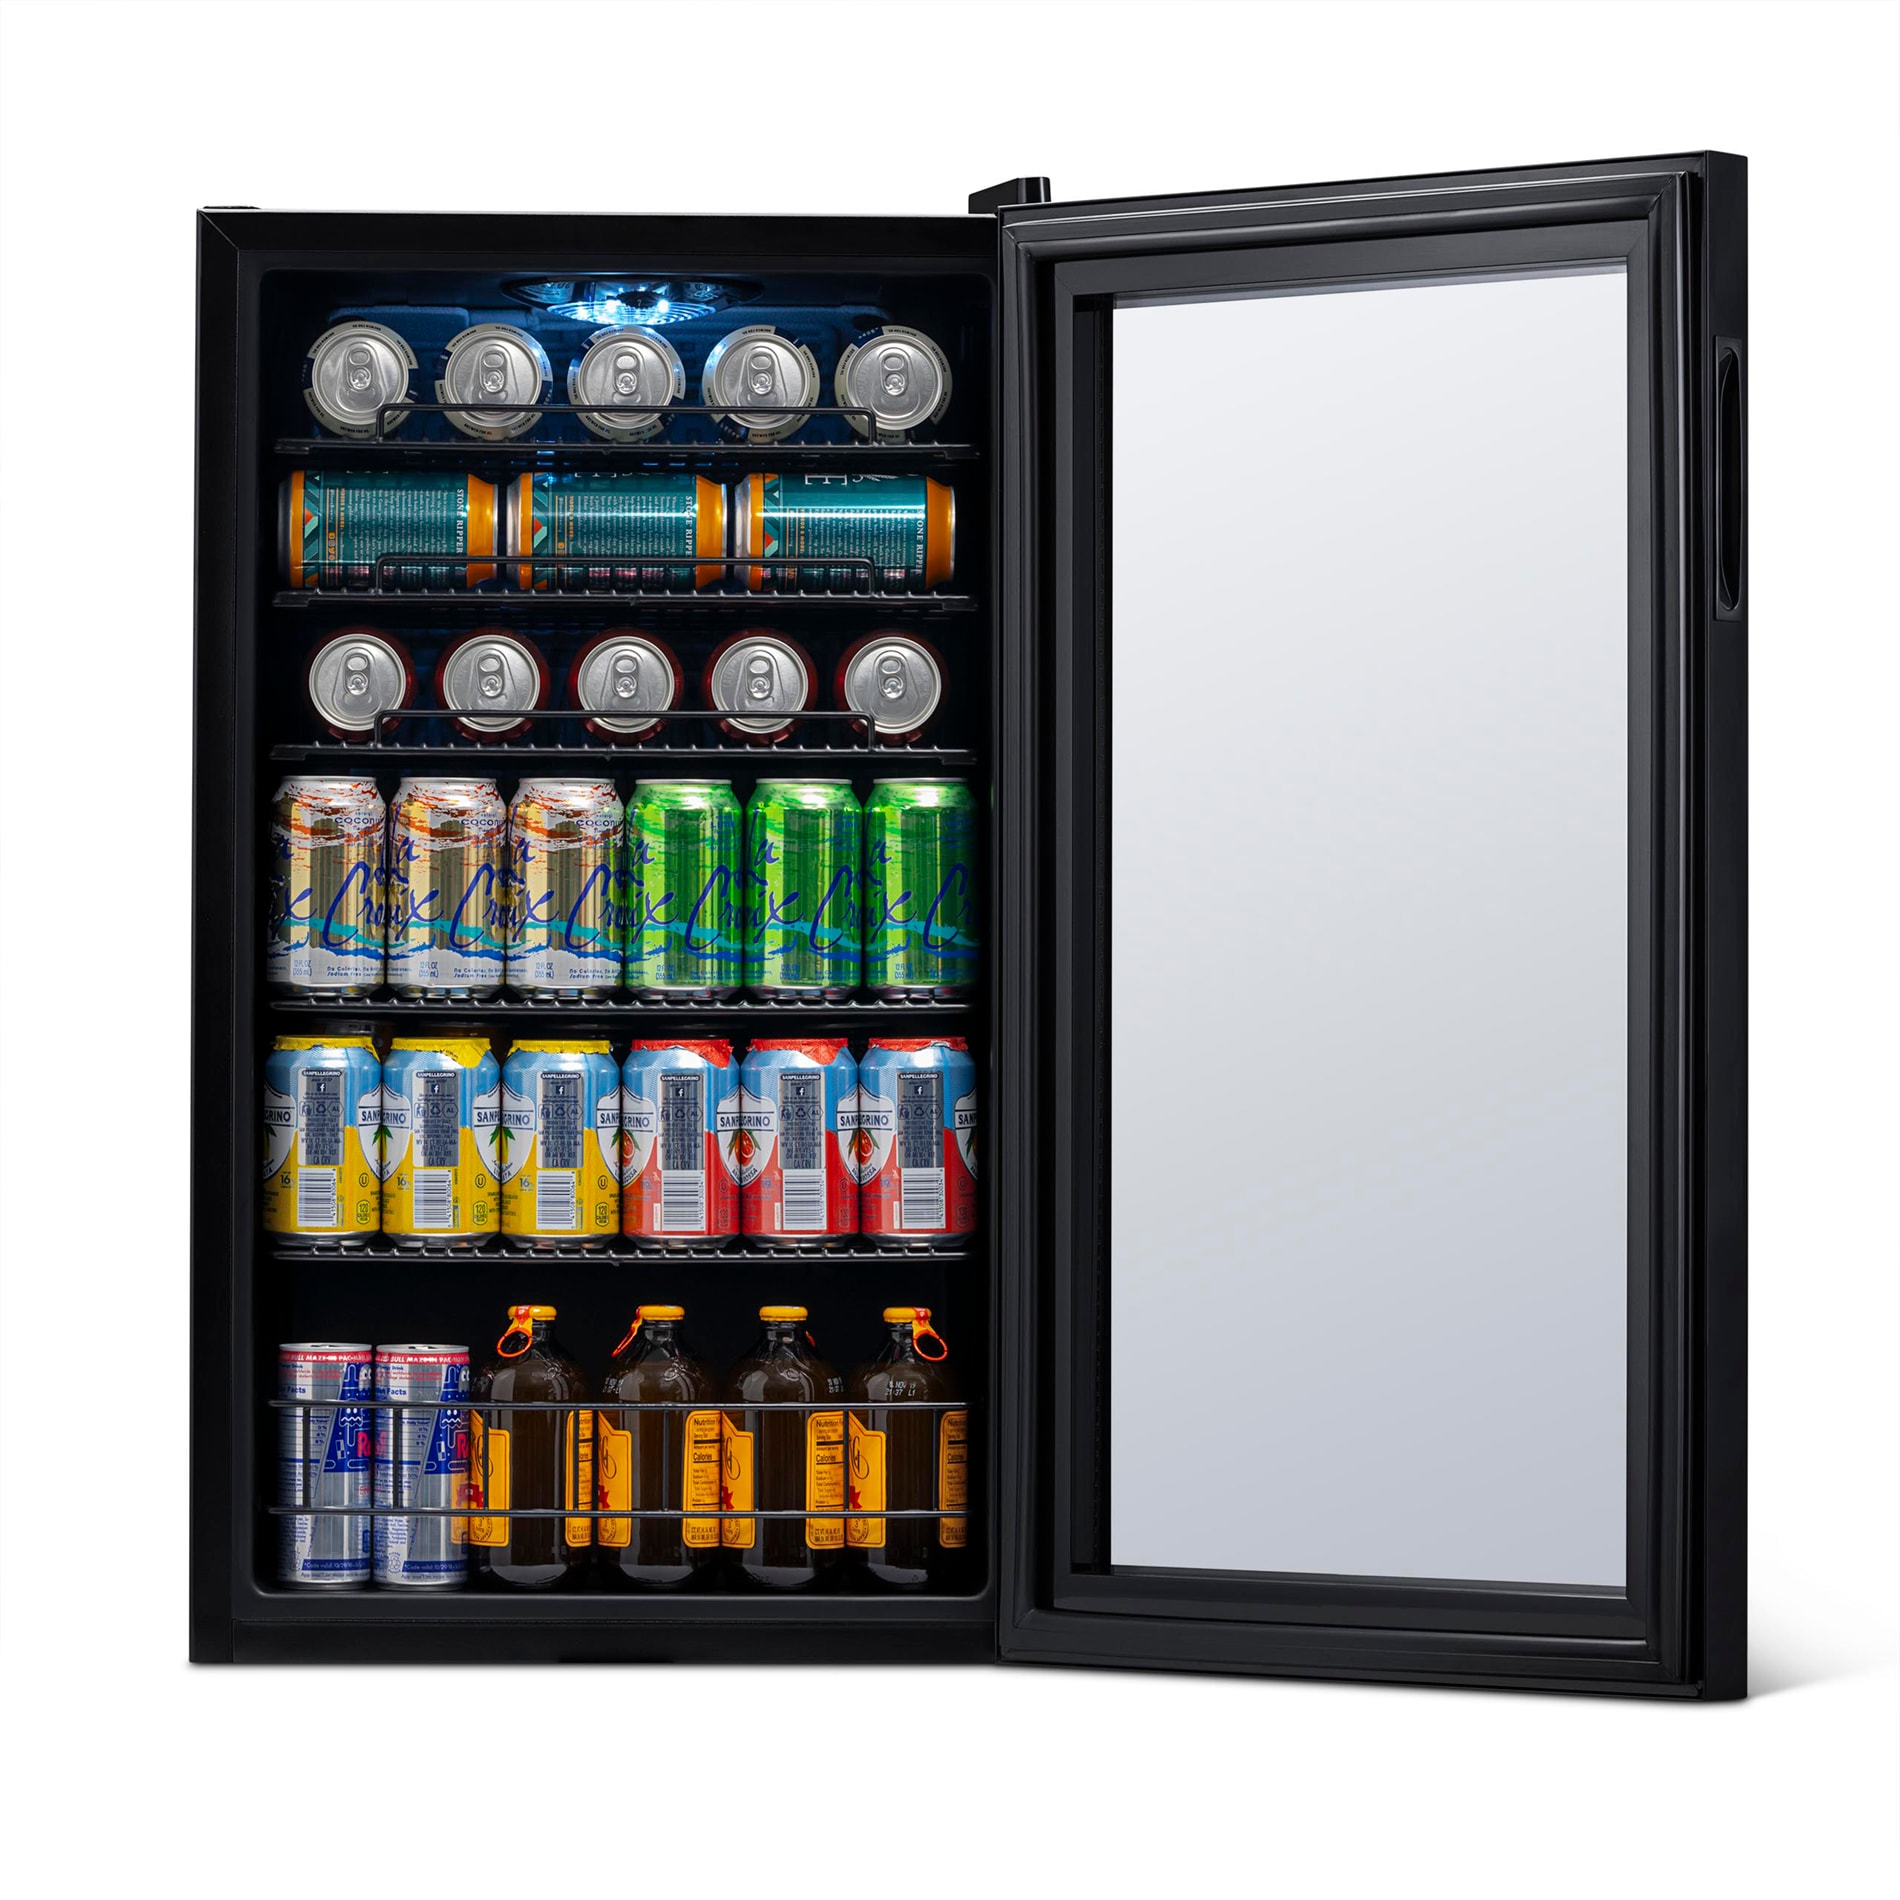 Hooure 17 in. Single Zone Freestanding 101-Cans Black Stainless Steel Beverage Cooler with Adjustable Removable Shelves